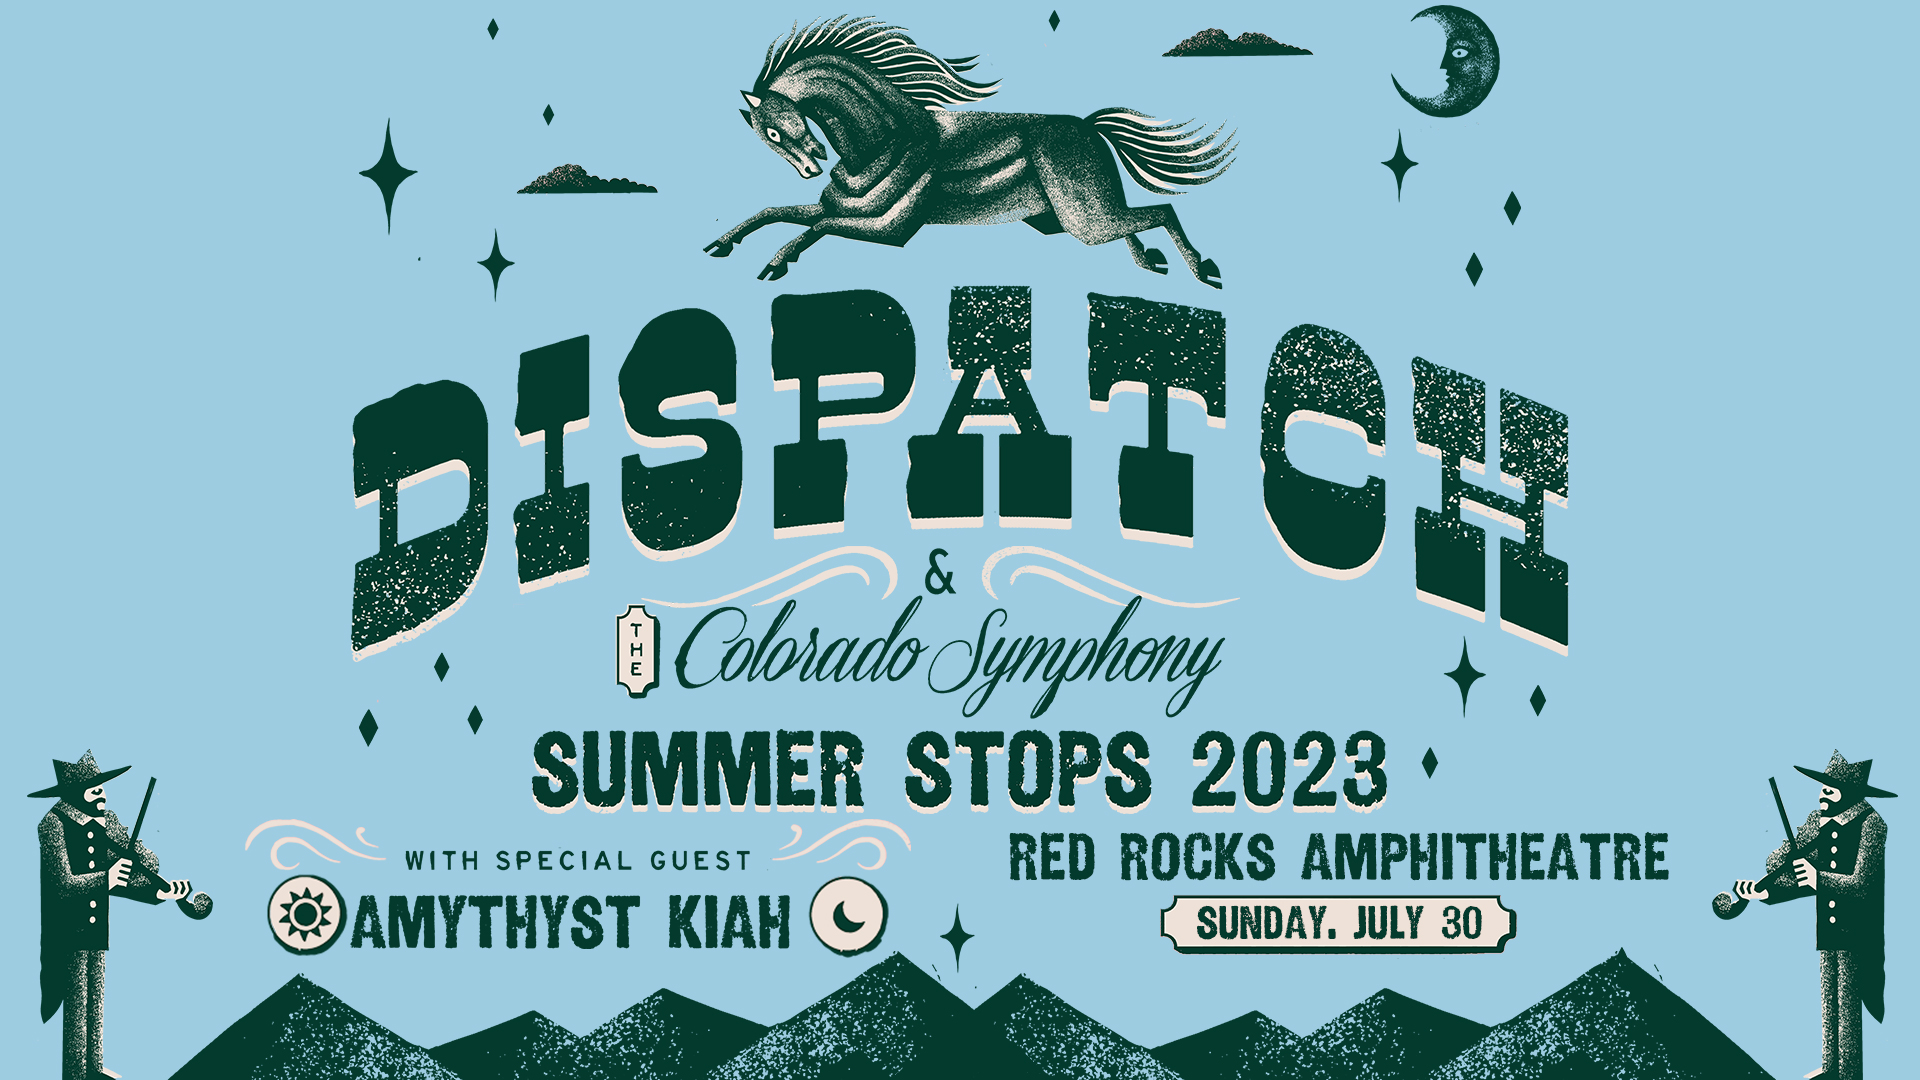 Dispatch to Perform with The Colorado Symphony at Red Rocks Amphitheatre